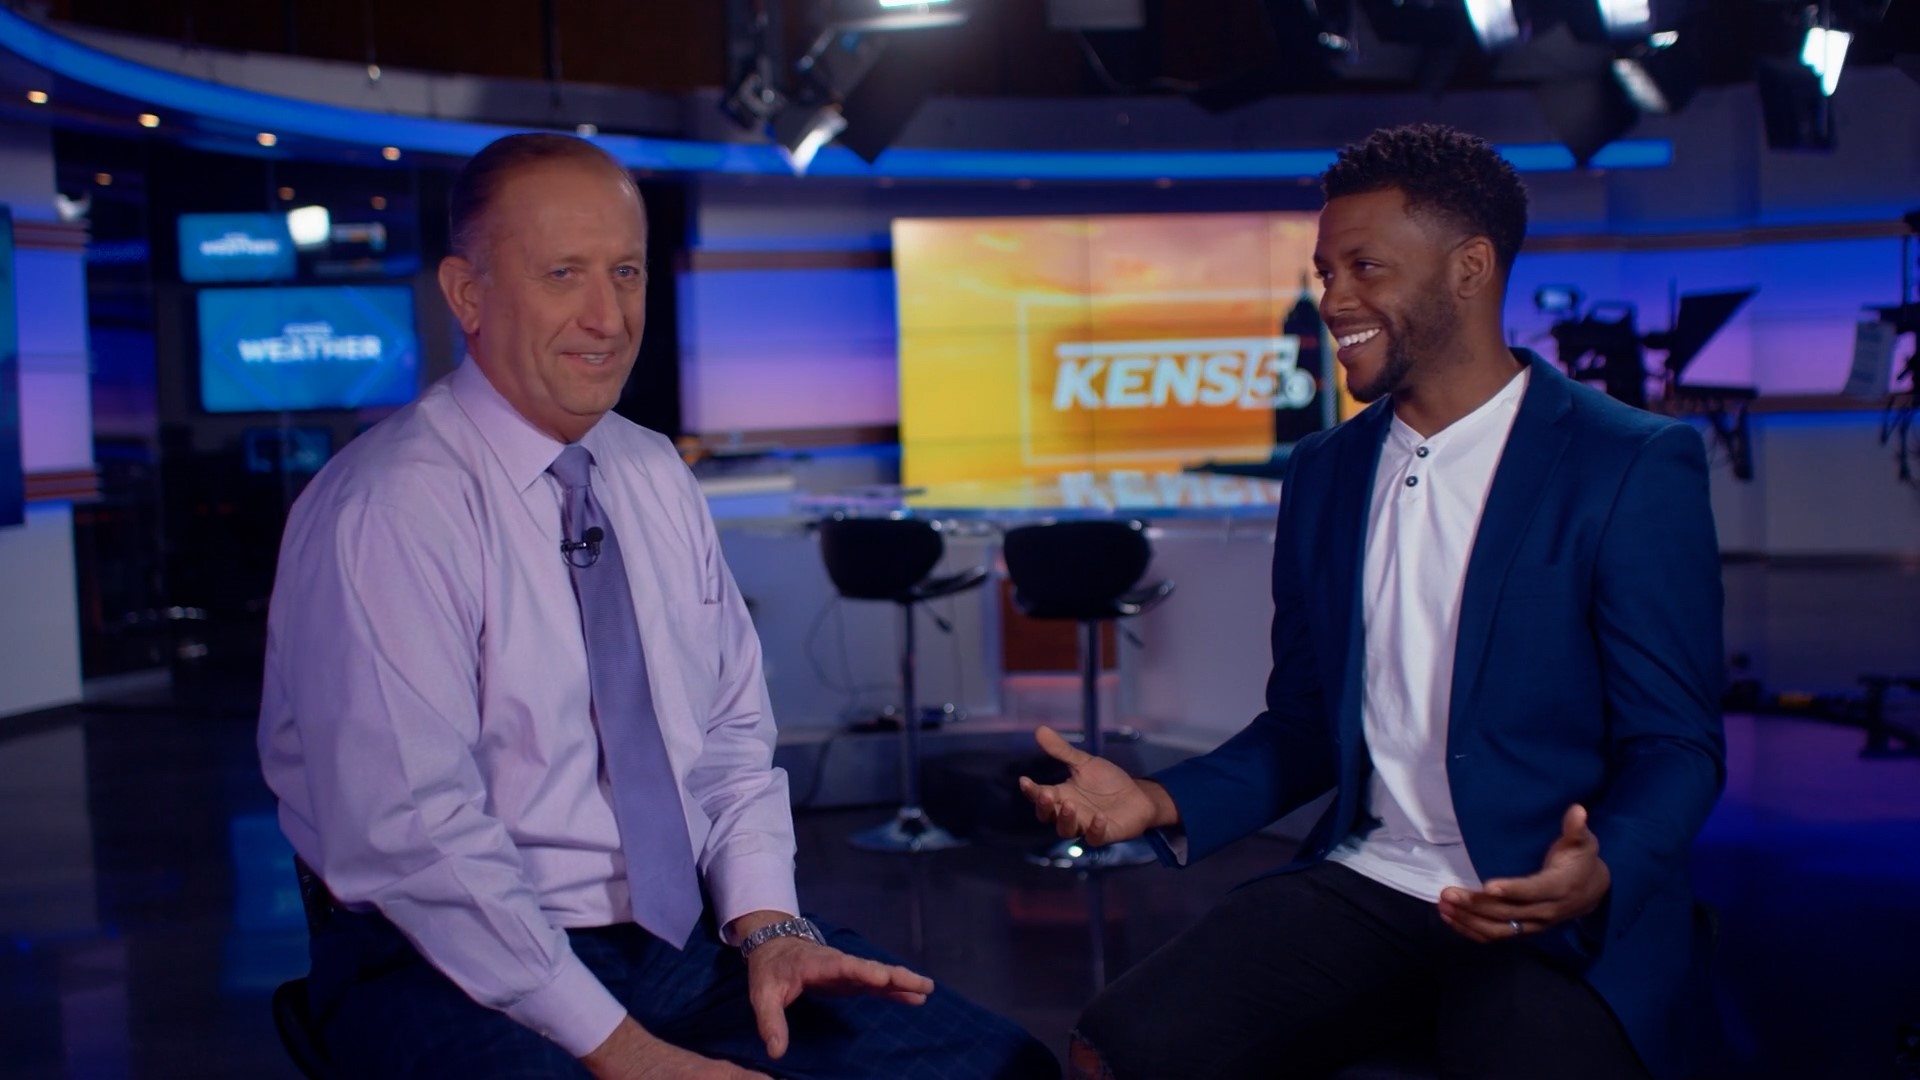 We're going OFFLINE with the thrill-seeking adventure king, Barry Davis! In honor of his 20th anniversary at KENS 5, Jon Coker puts him on the hot seat.